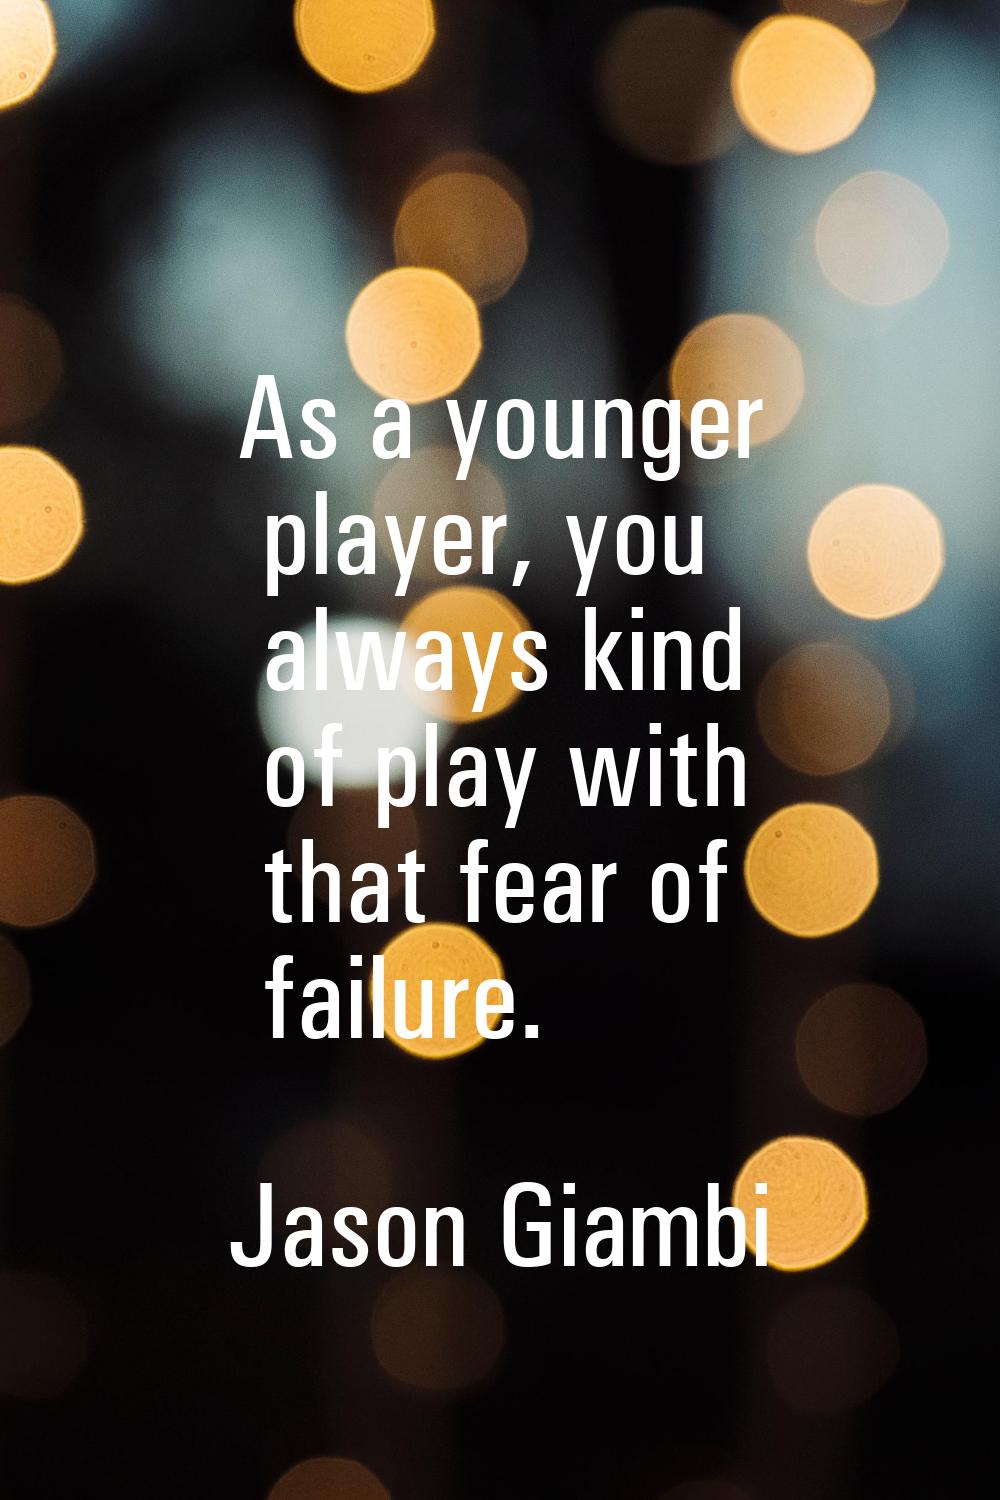 As a younger player, you always kind of play with that fear of failure.